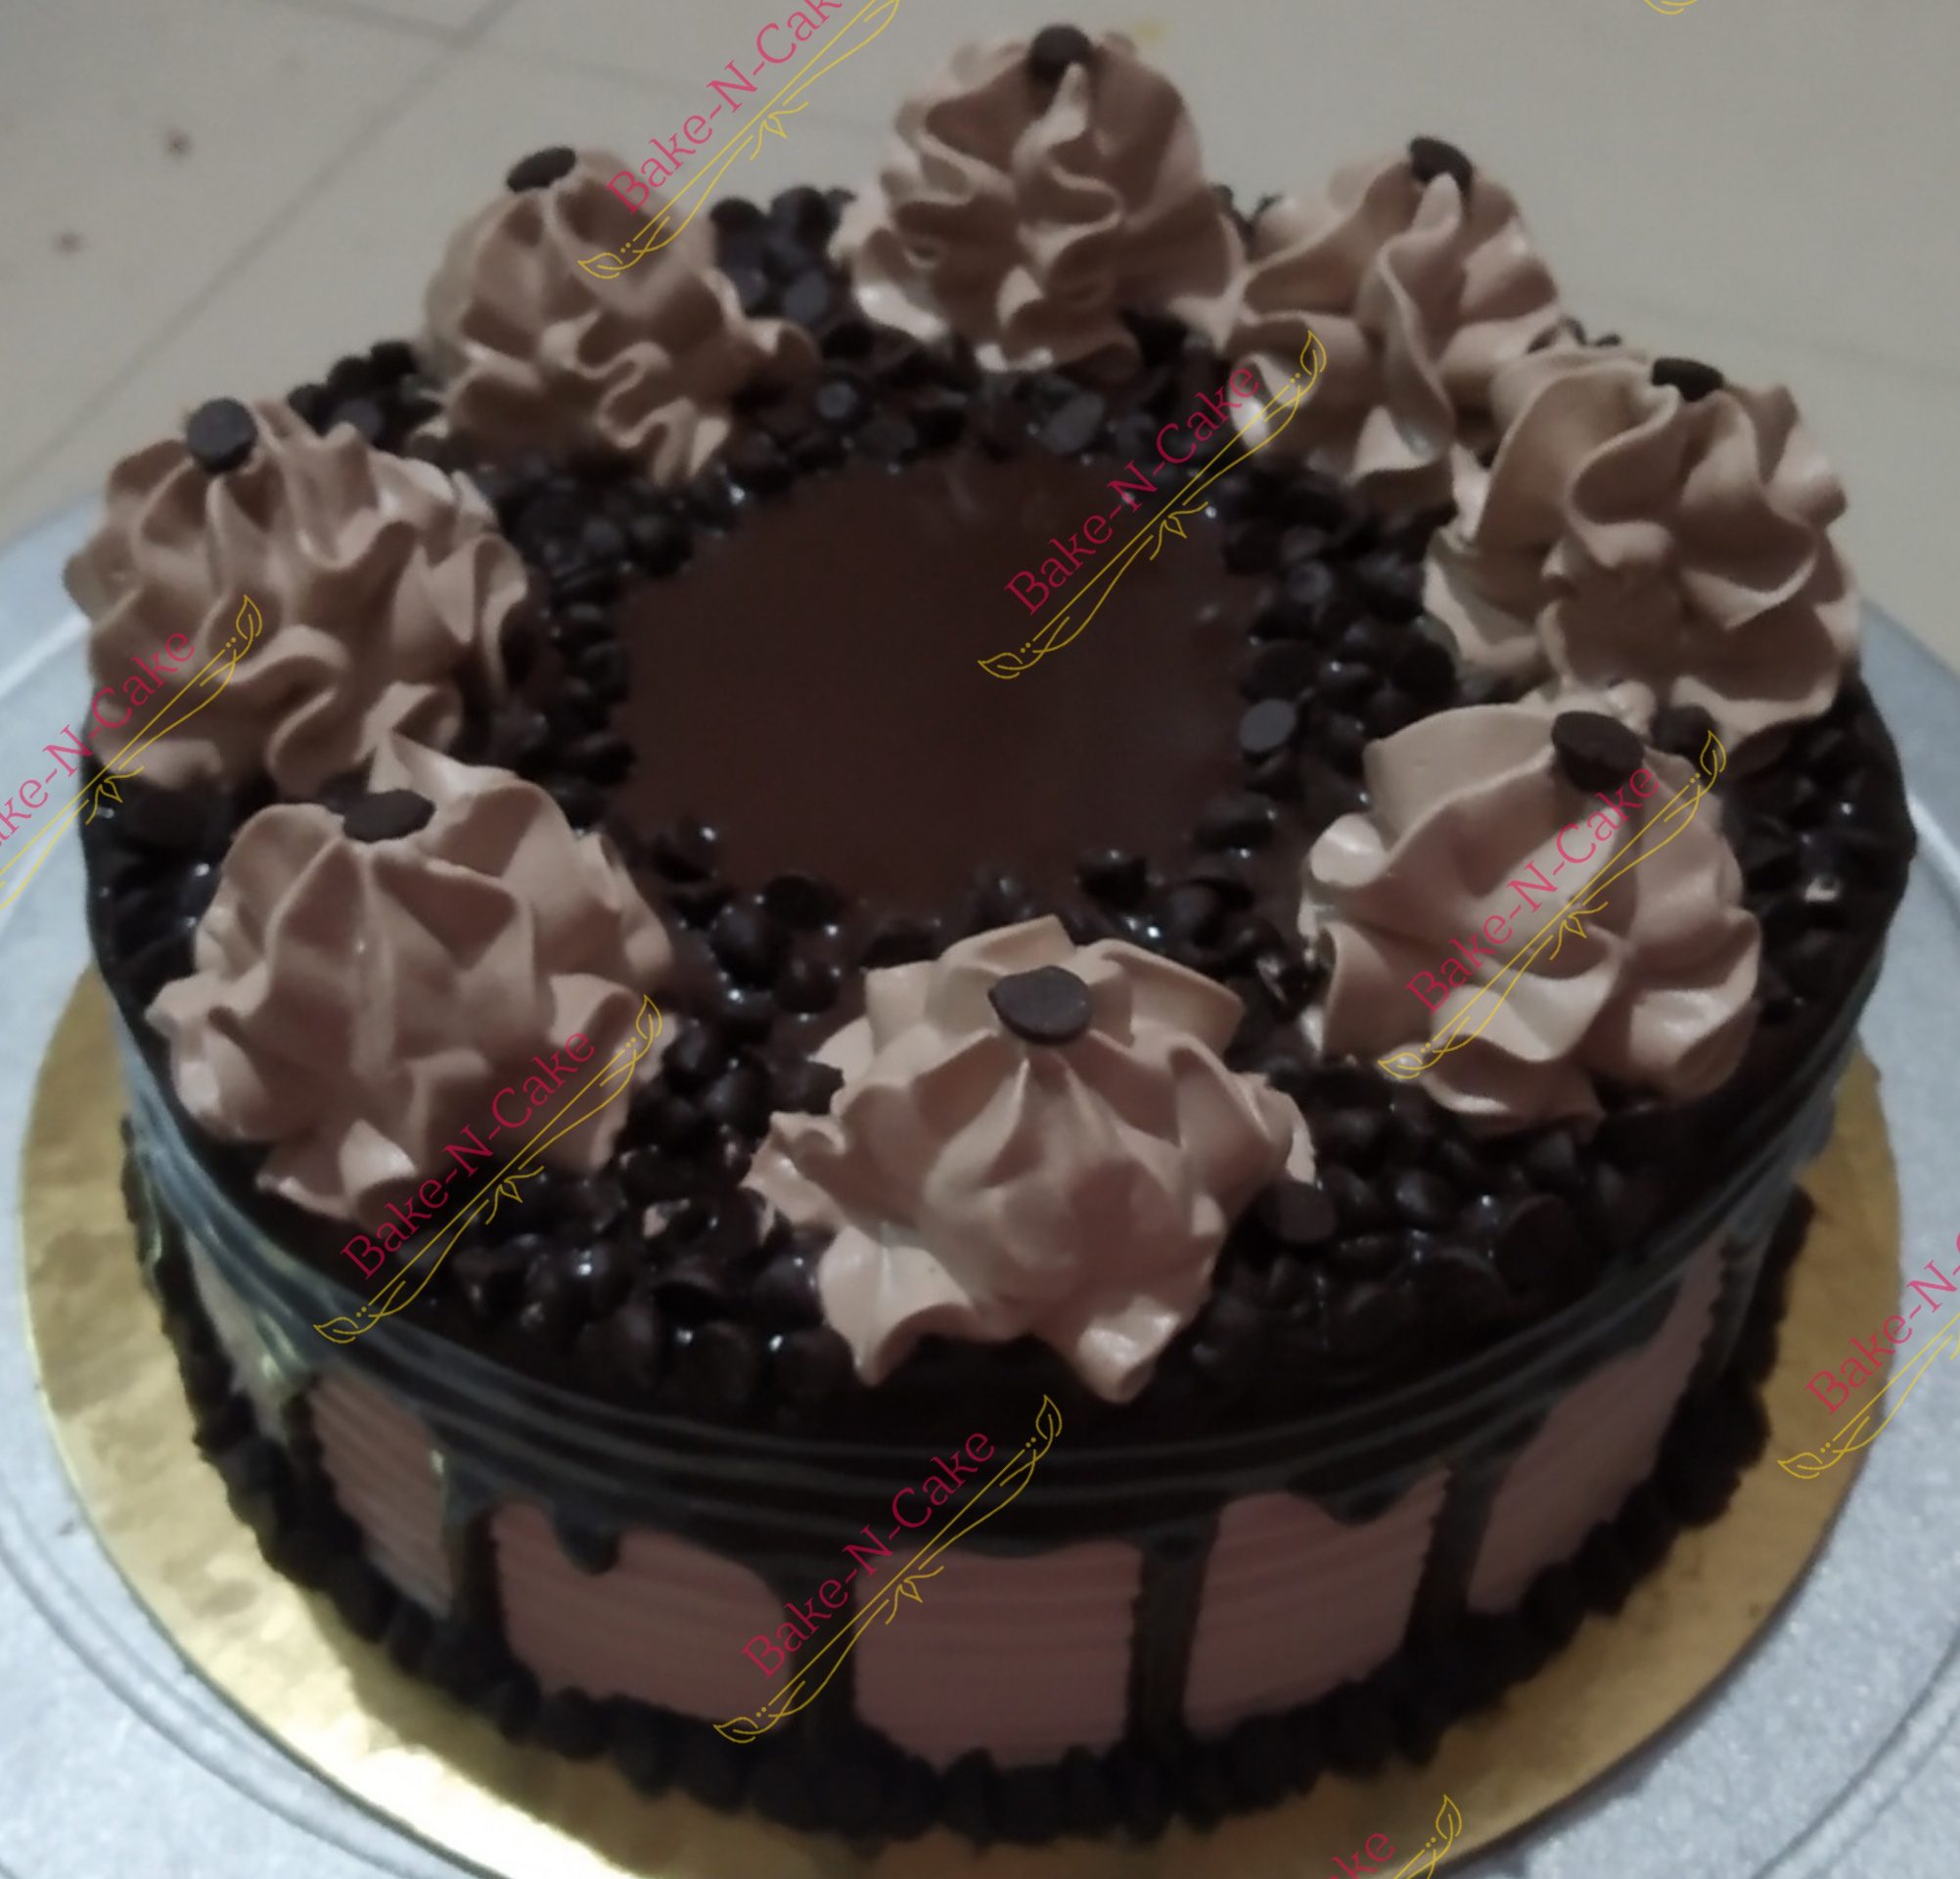 Chocochips Chocolate Cake Designs, Images, Price Near Me